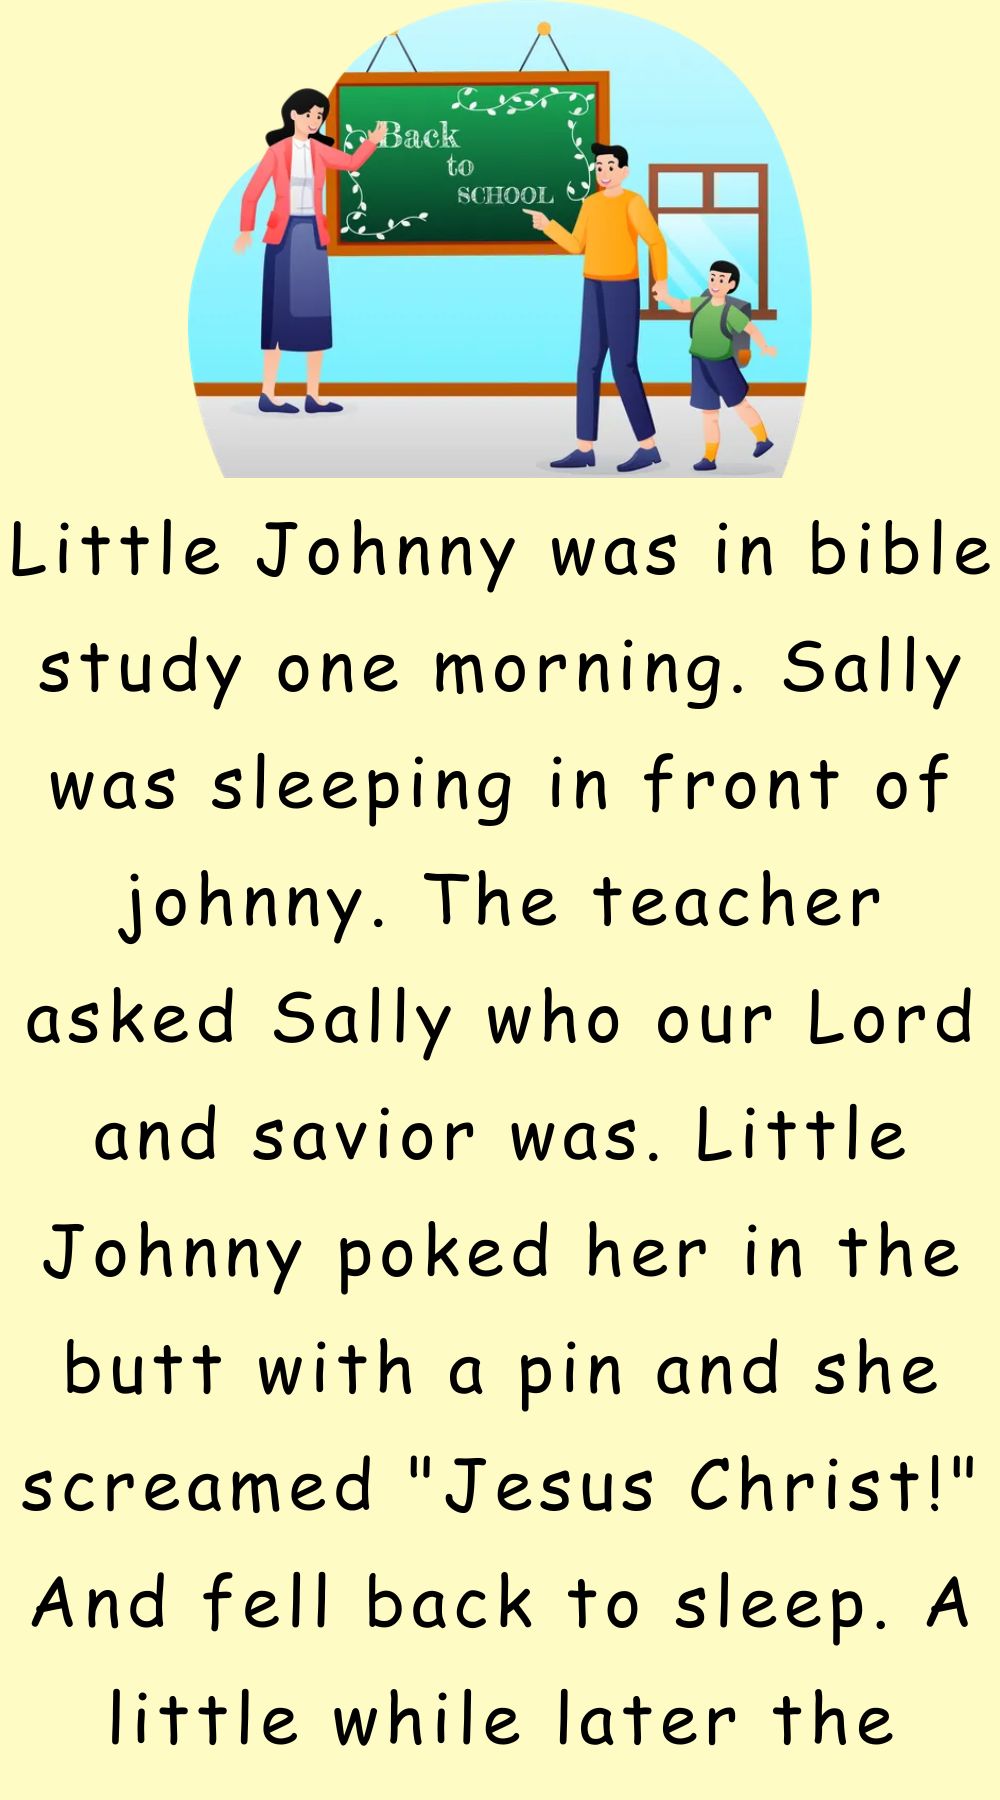 Little Johnny was in bible study